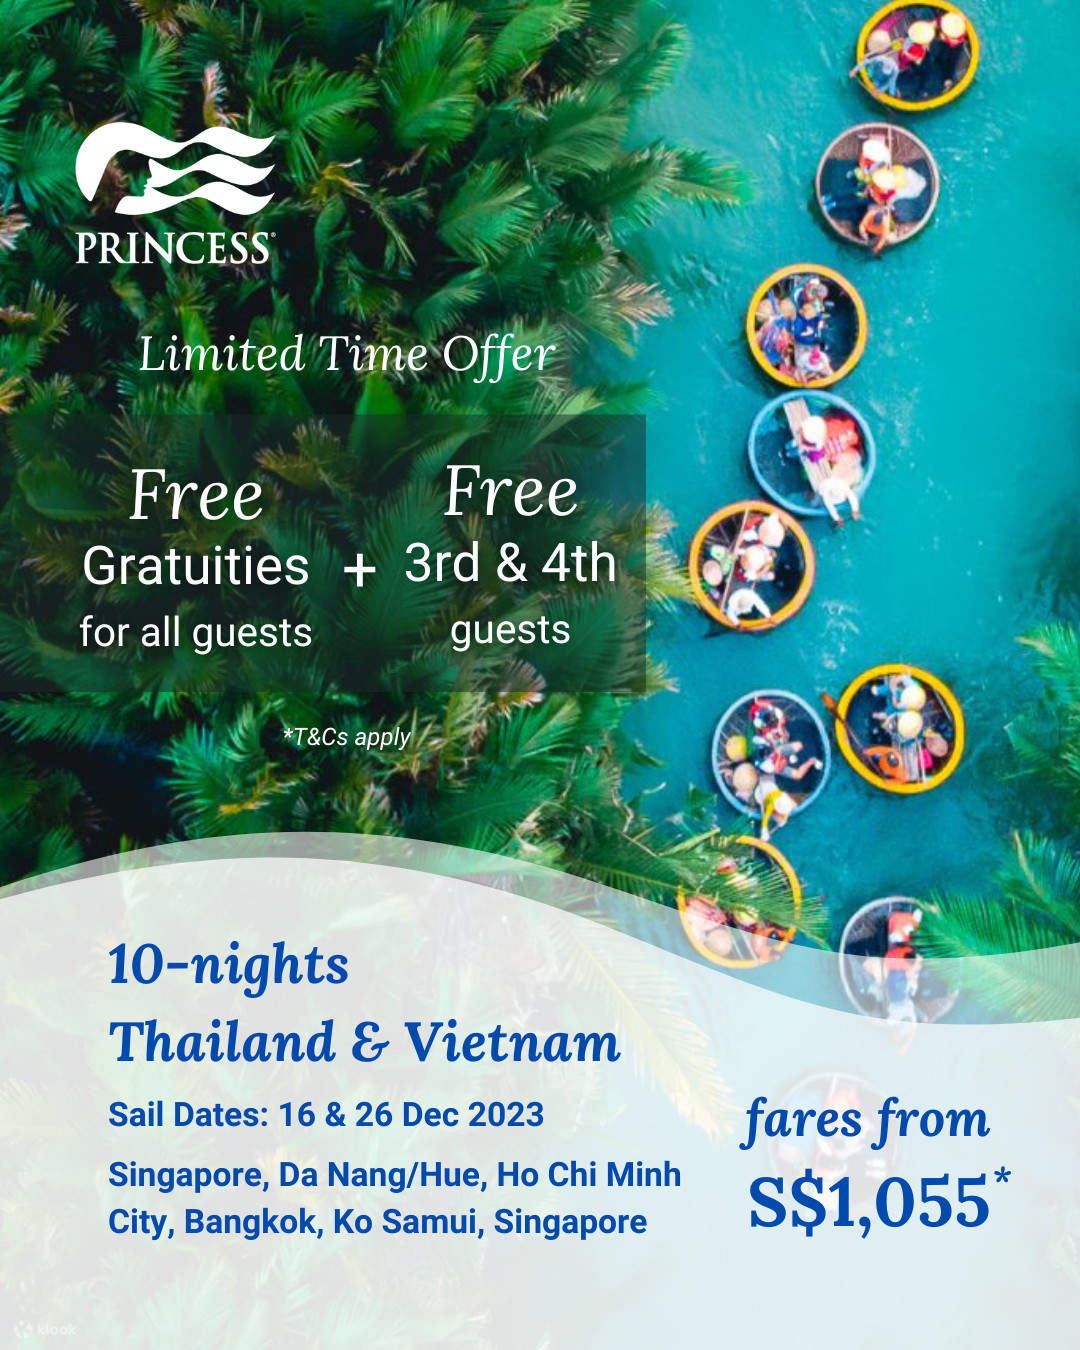 cruise trip from singapore to thailand